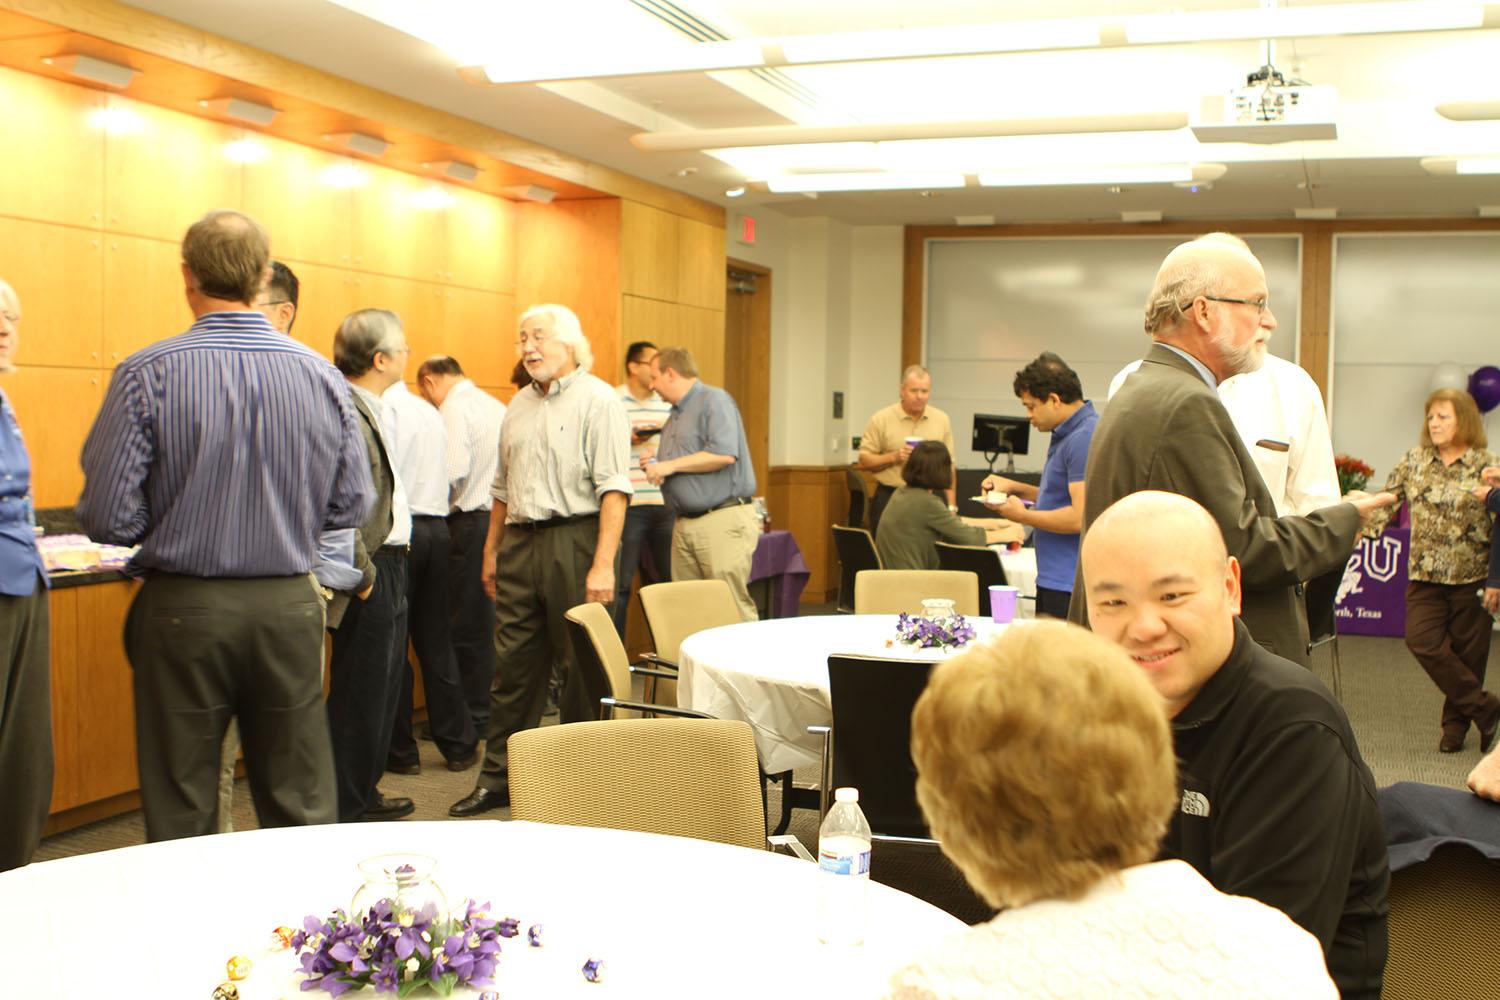 The+Mathematics+Department+held+in+reception+in+honor+of+Robert+Dorans+46+years+of+work+at+TCU.+